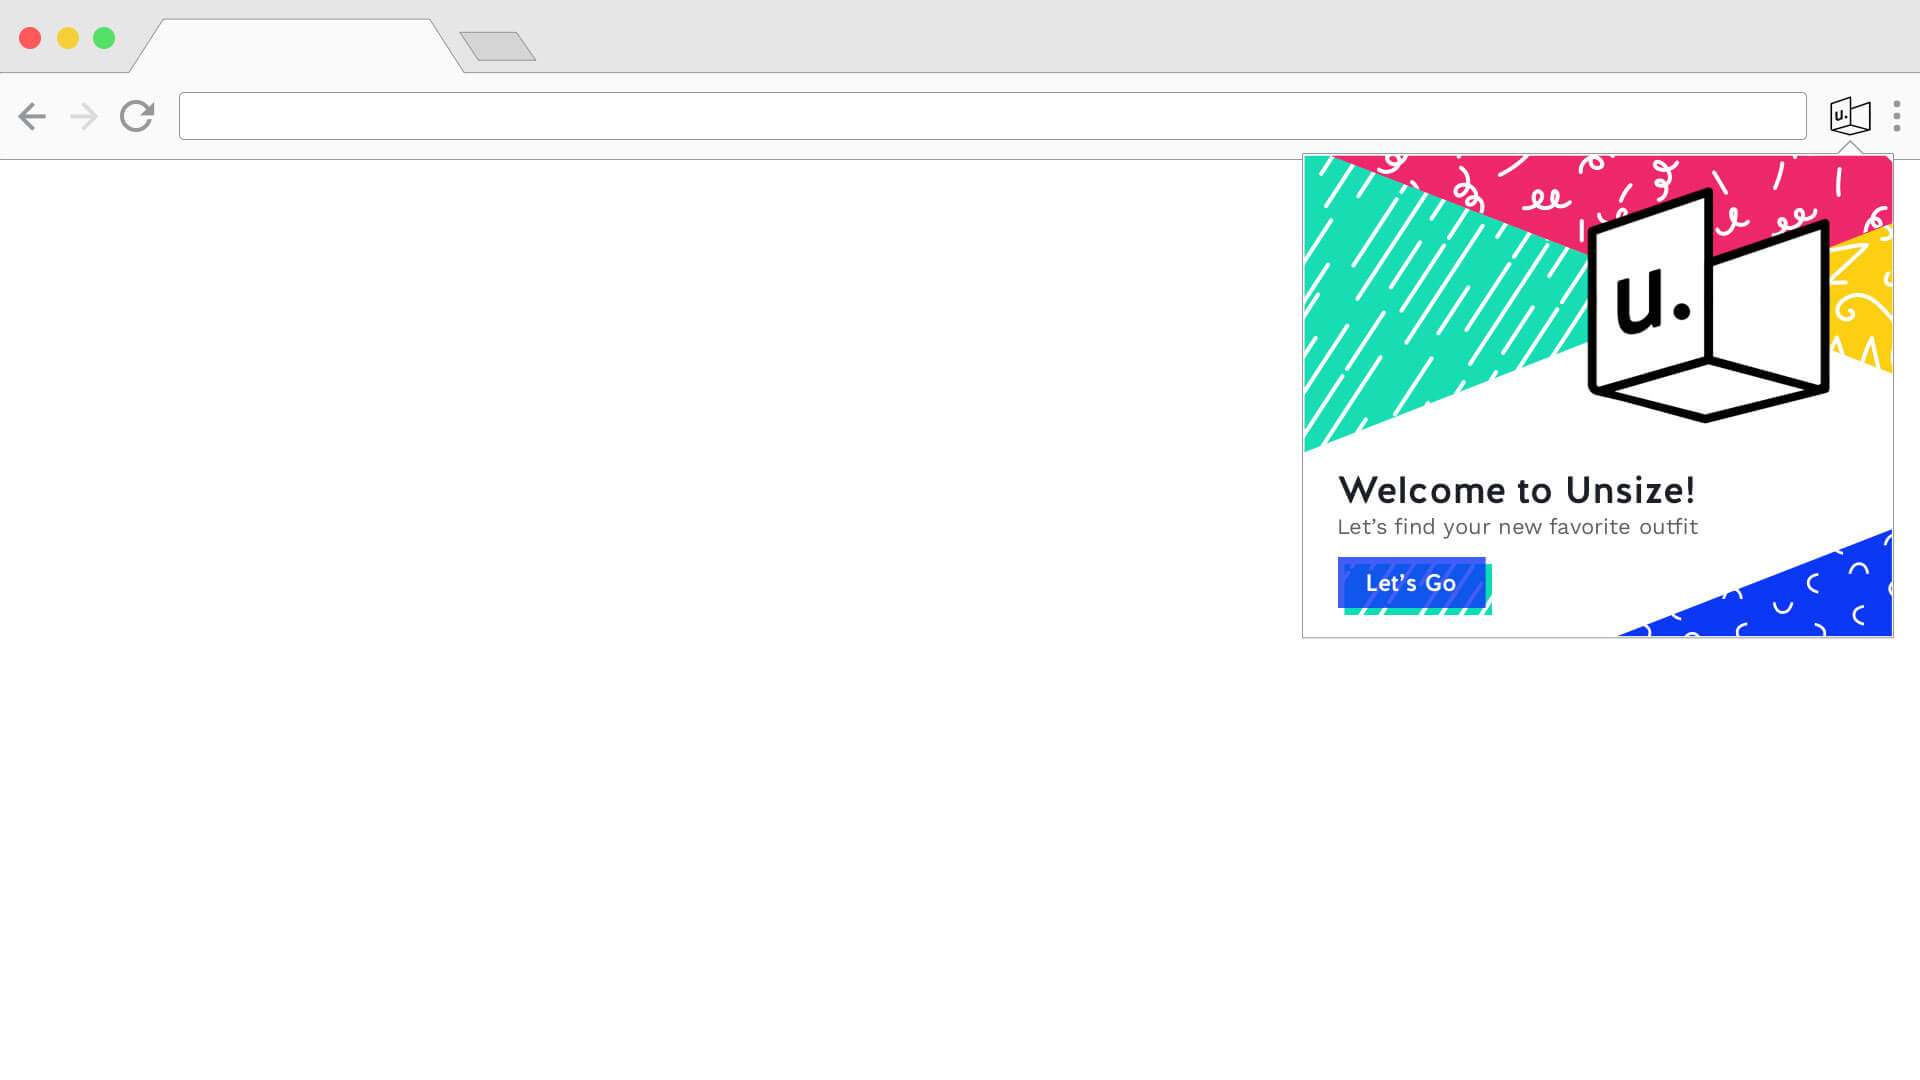 The welcome screen to the chrome extension, featuring a button that says "Let's Go".